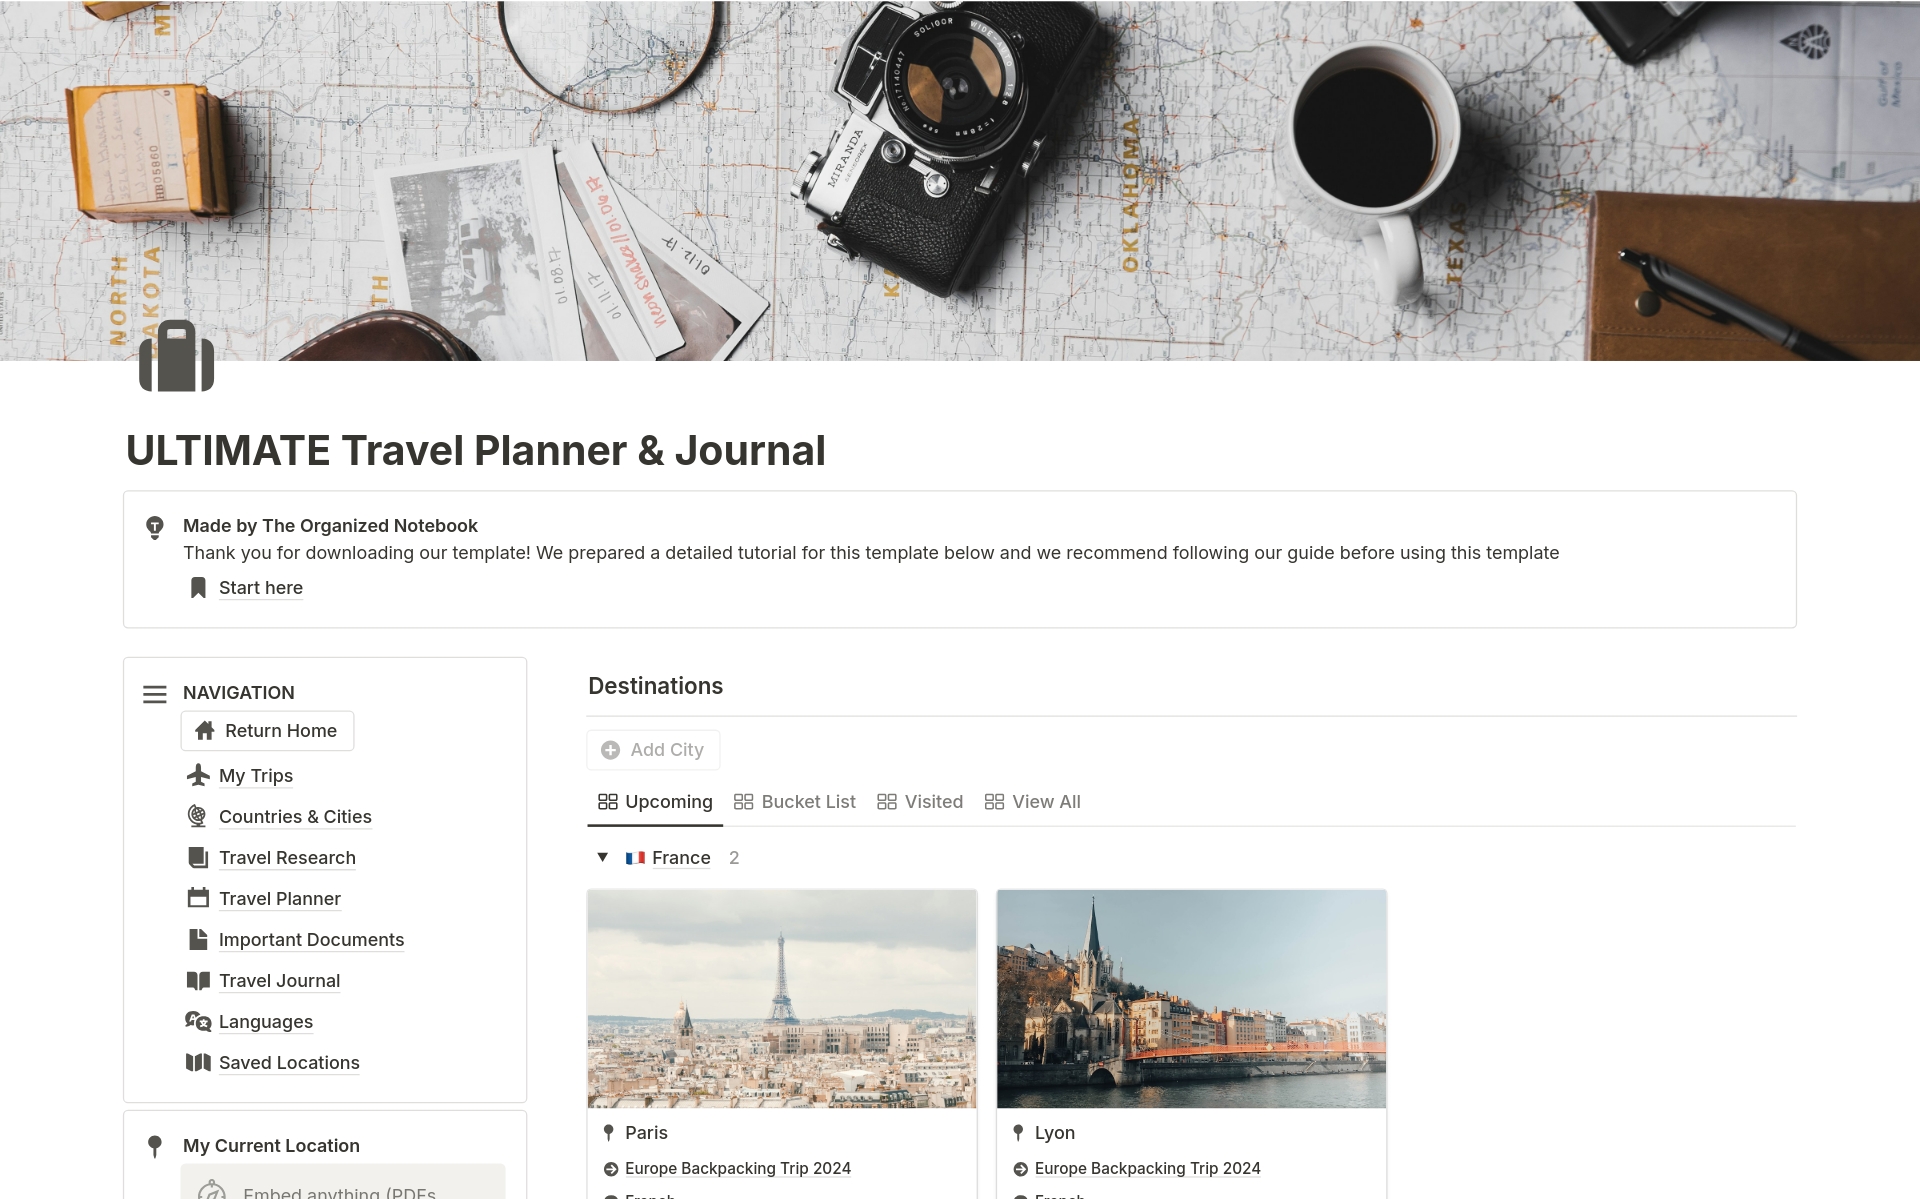 Looking for the best way to plan and record your travels? Our Ultimate Travel Planner template is perfect for anyone wanting a detailed record of their journeys. With sections for itineraries, expenses, packing lists, travel research, and travel journals, this template will captu